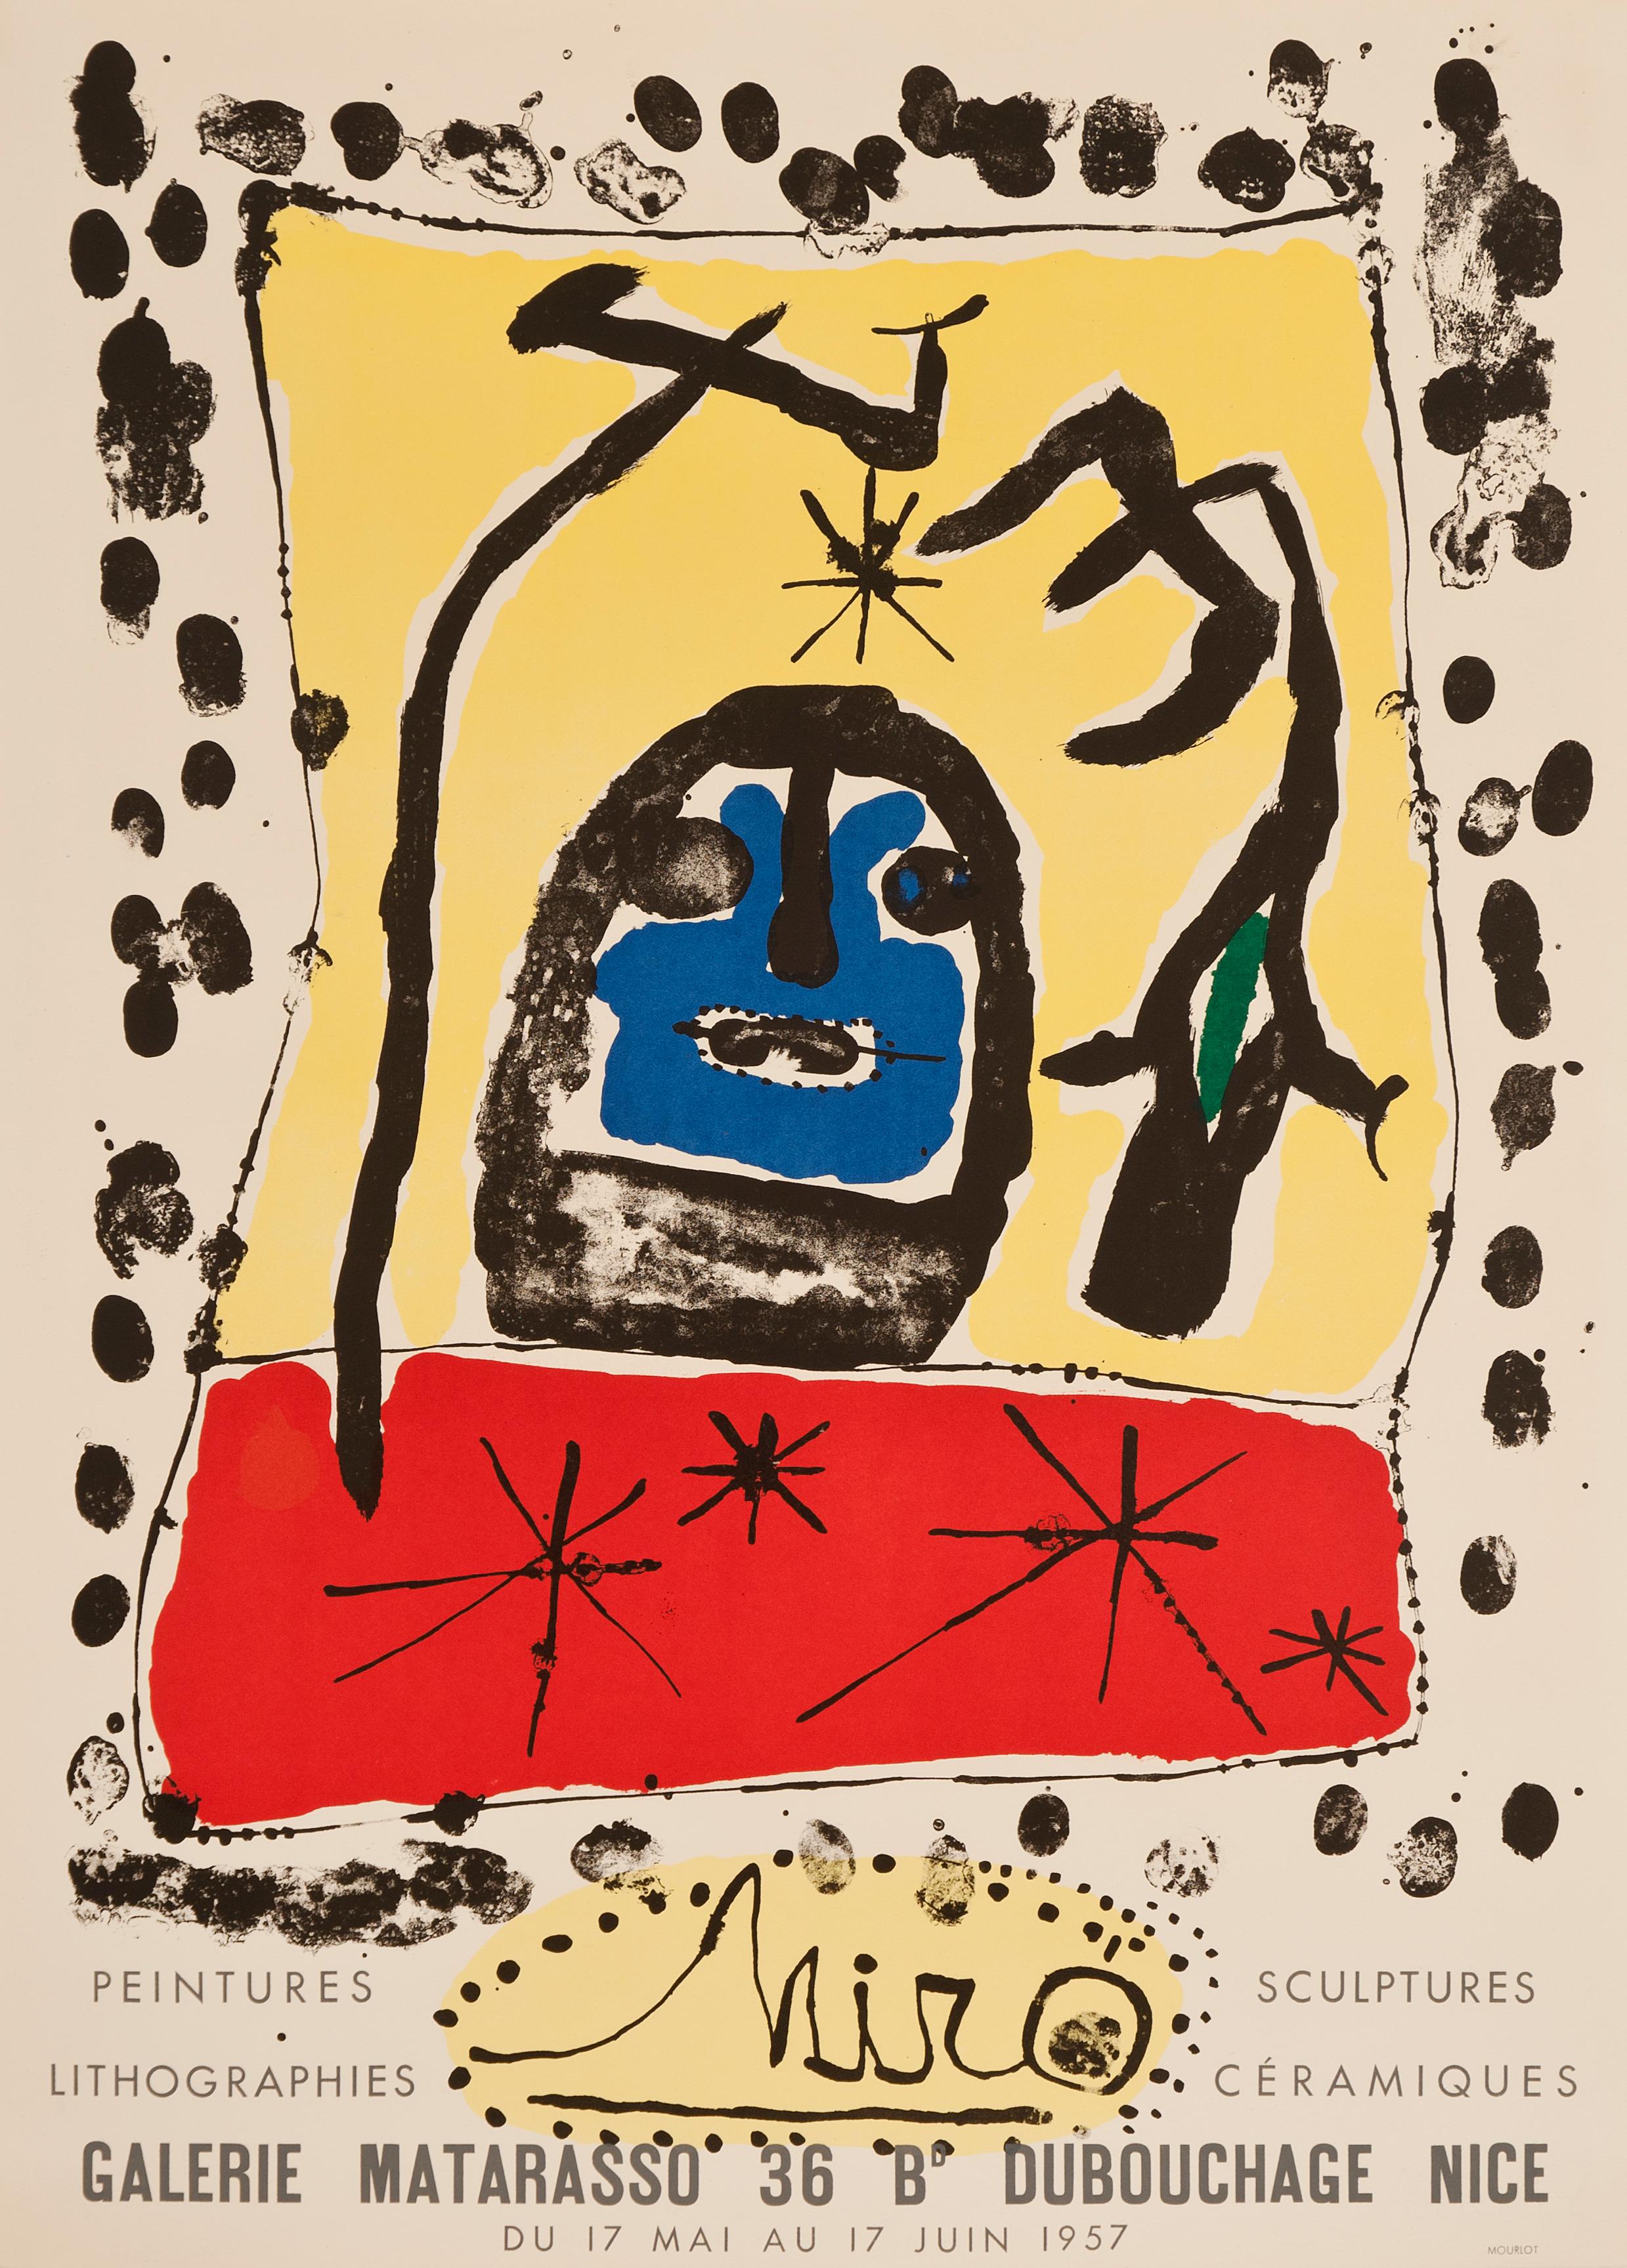 Joan Miró Abstract Print - Galerie Matarasso by Joan Miro - Abstract expressionism exhibition poster